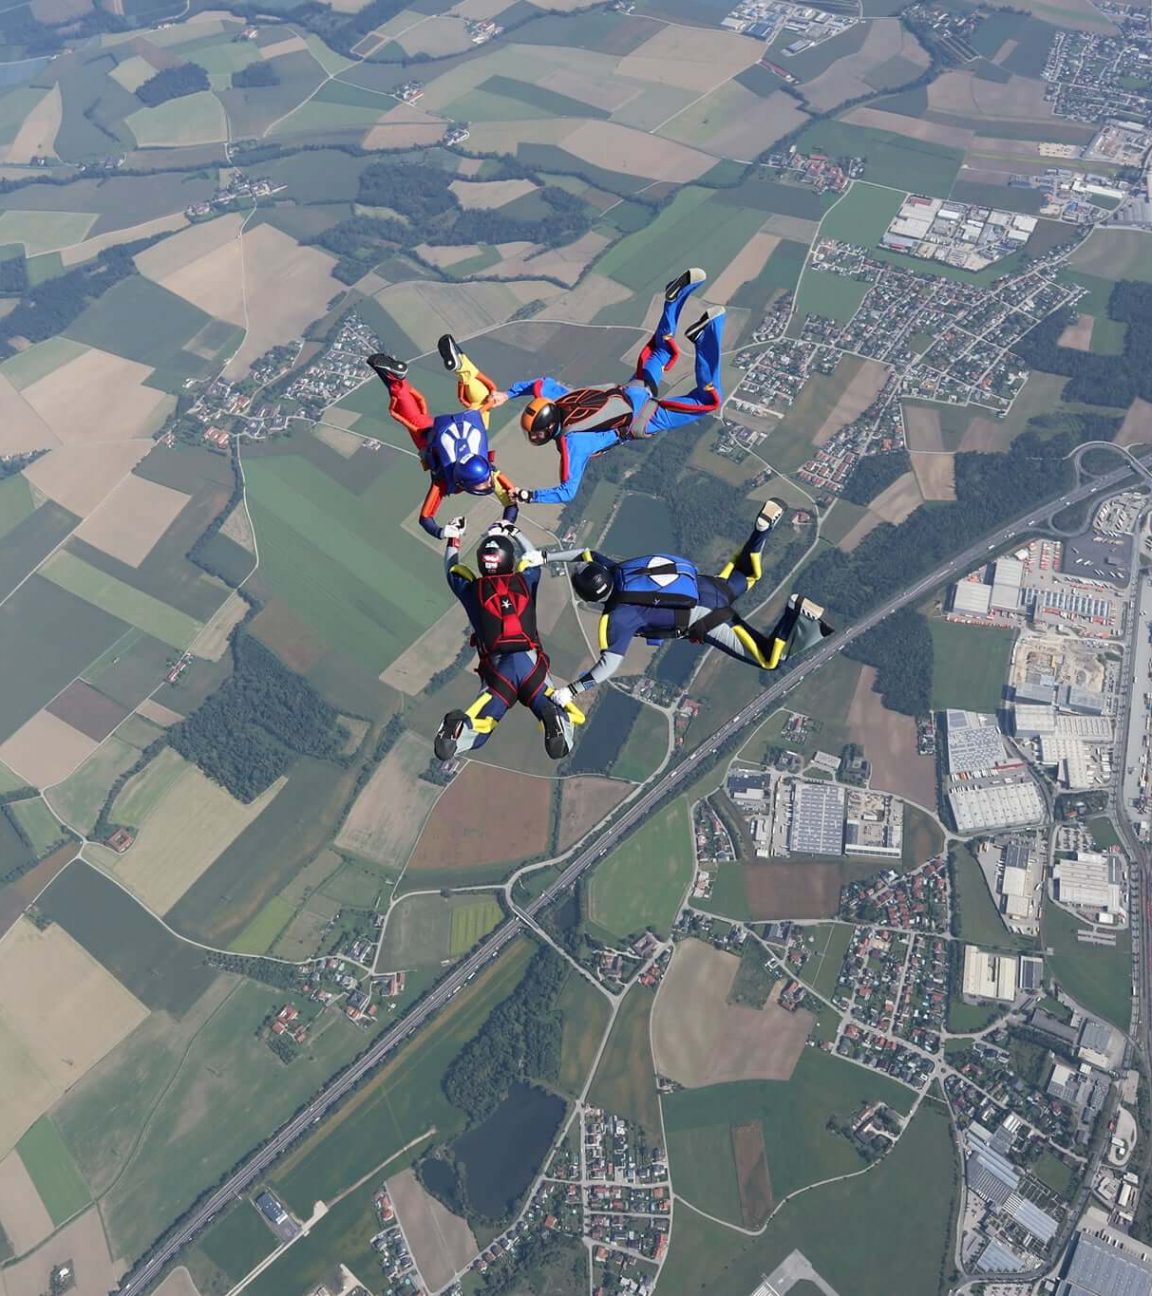 Airvolution – 4-way formation Skydive Team